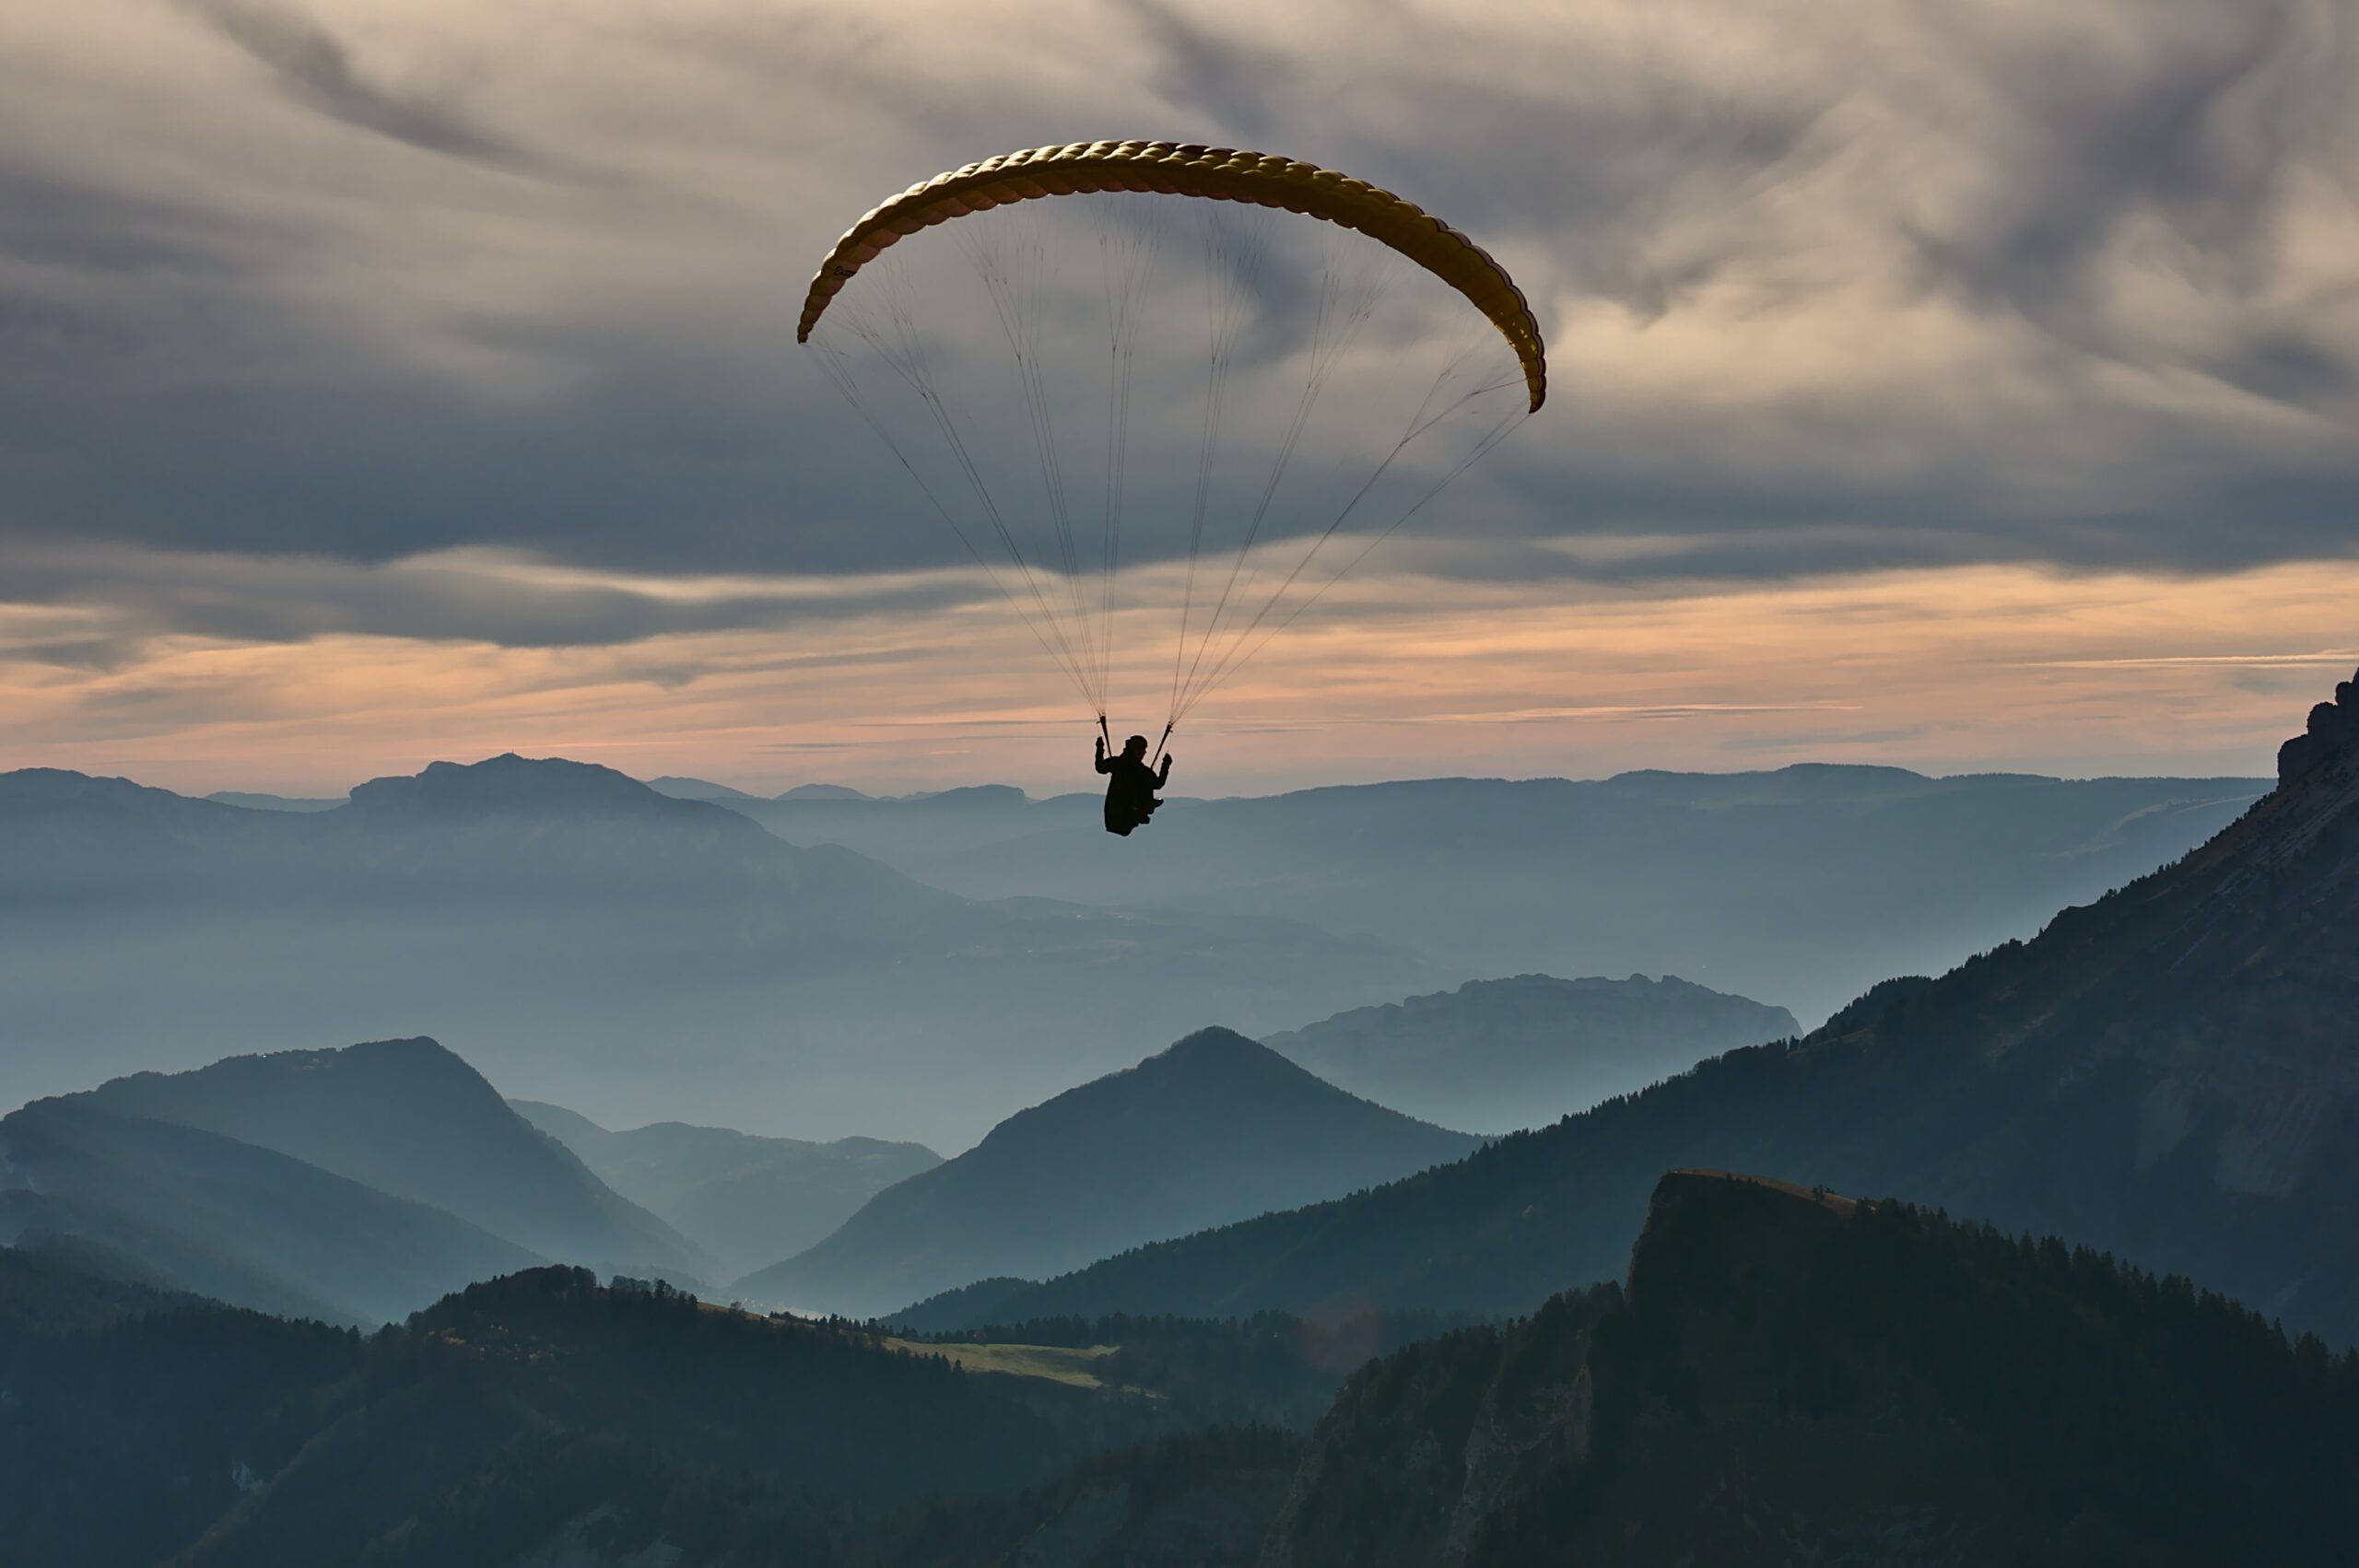 Skydiving in the mountains